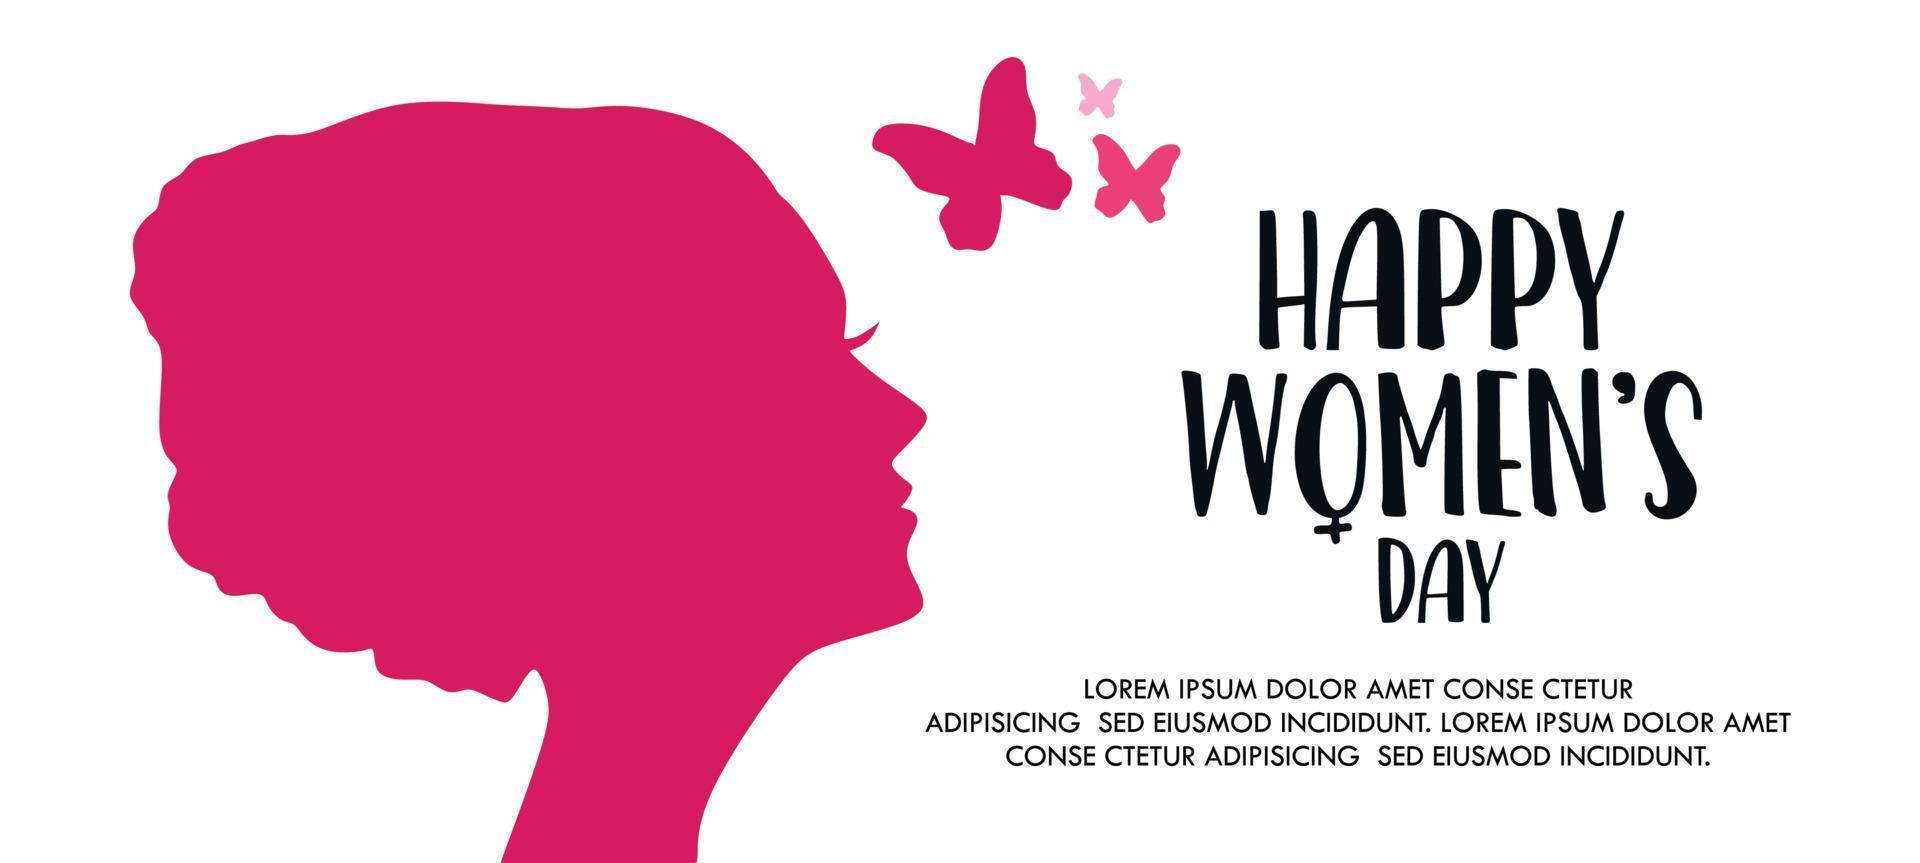 happy women's day 8 march banner design pink and white color in vector